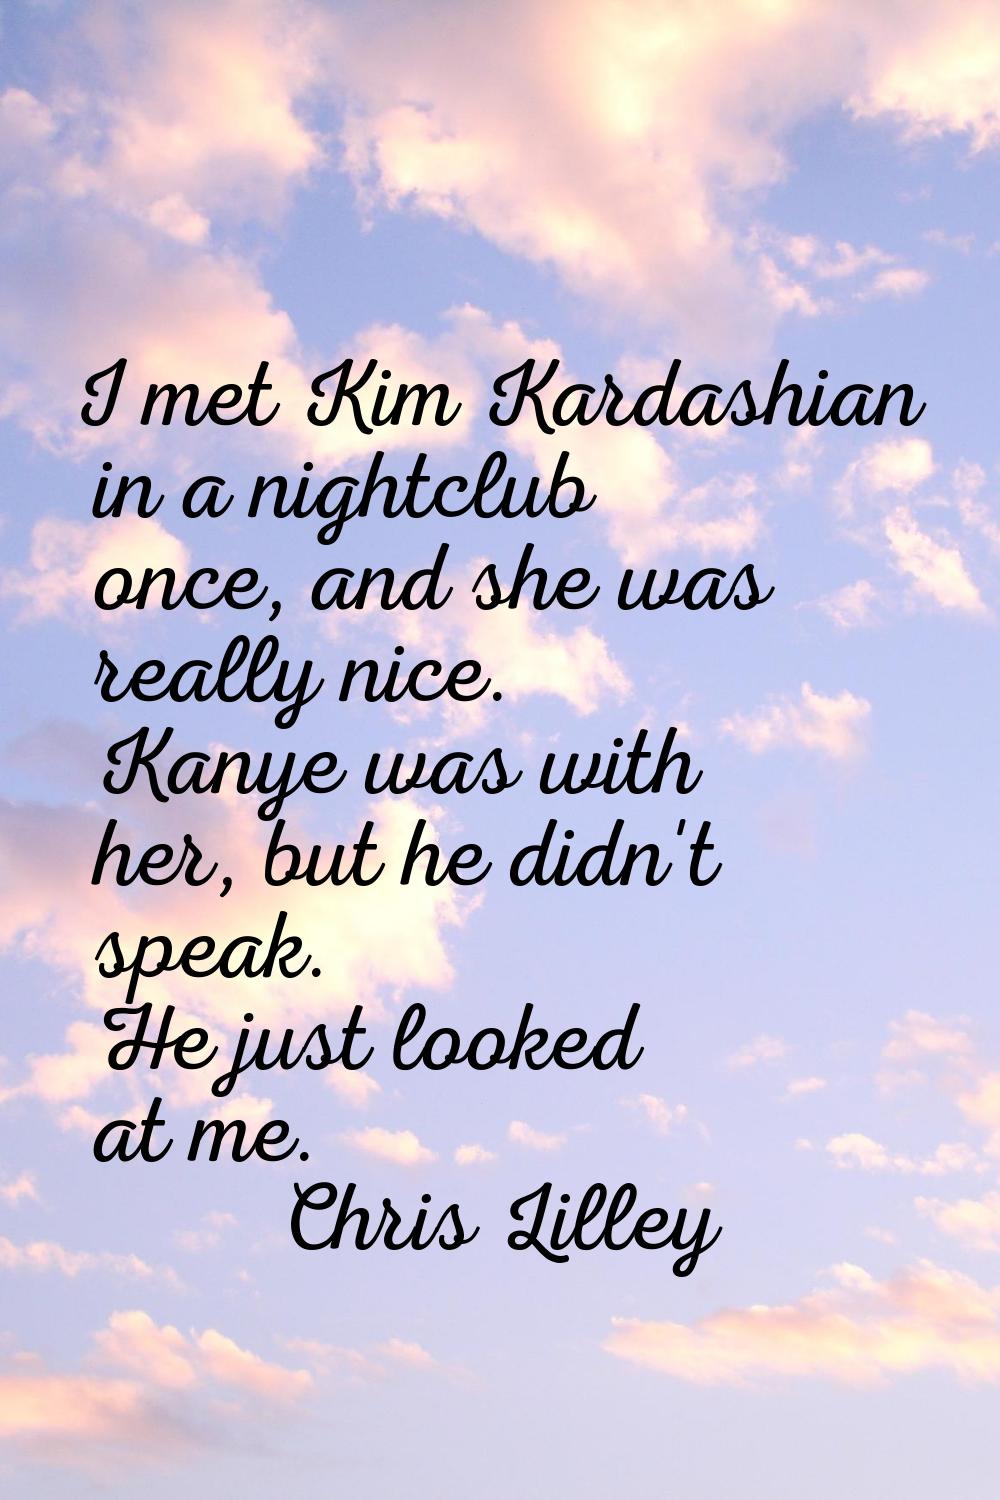 I met Kim Kardashian in a nightclub once, and she was really nice. Kanye was with her, but he didn'